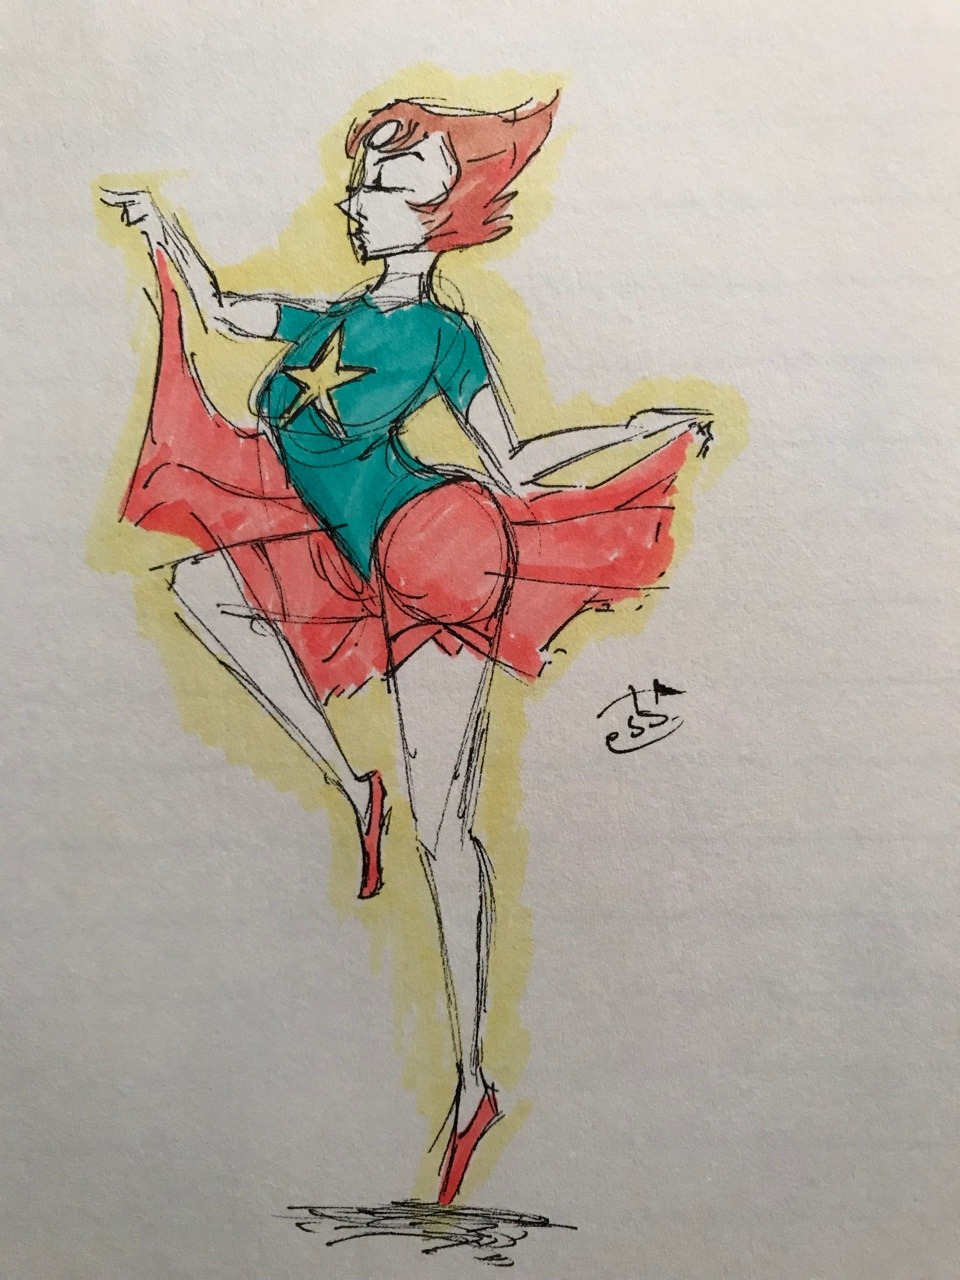 Drew Pearl from SU, can’t wait for the new episodes!